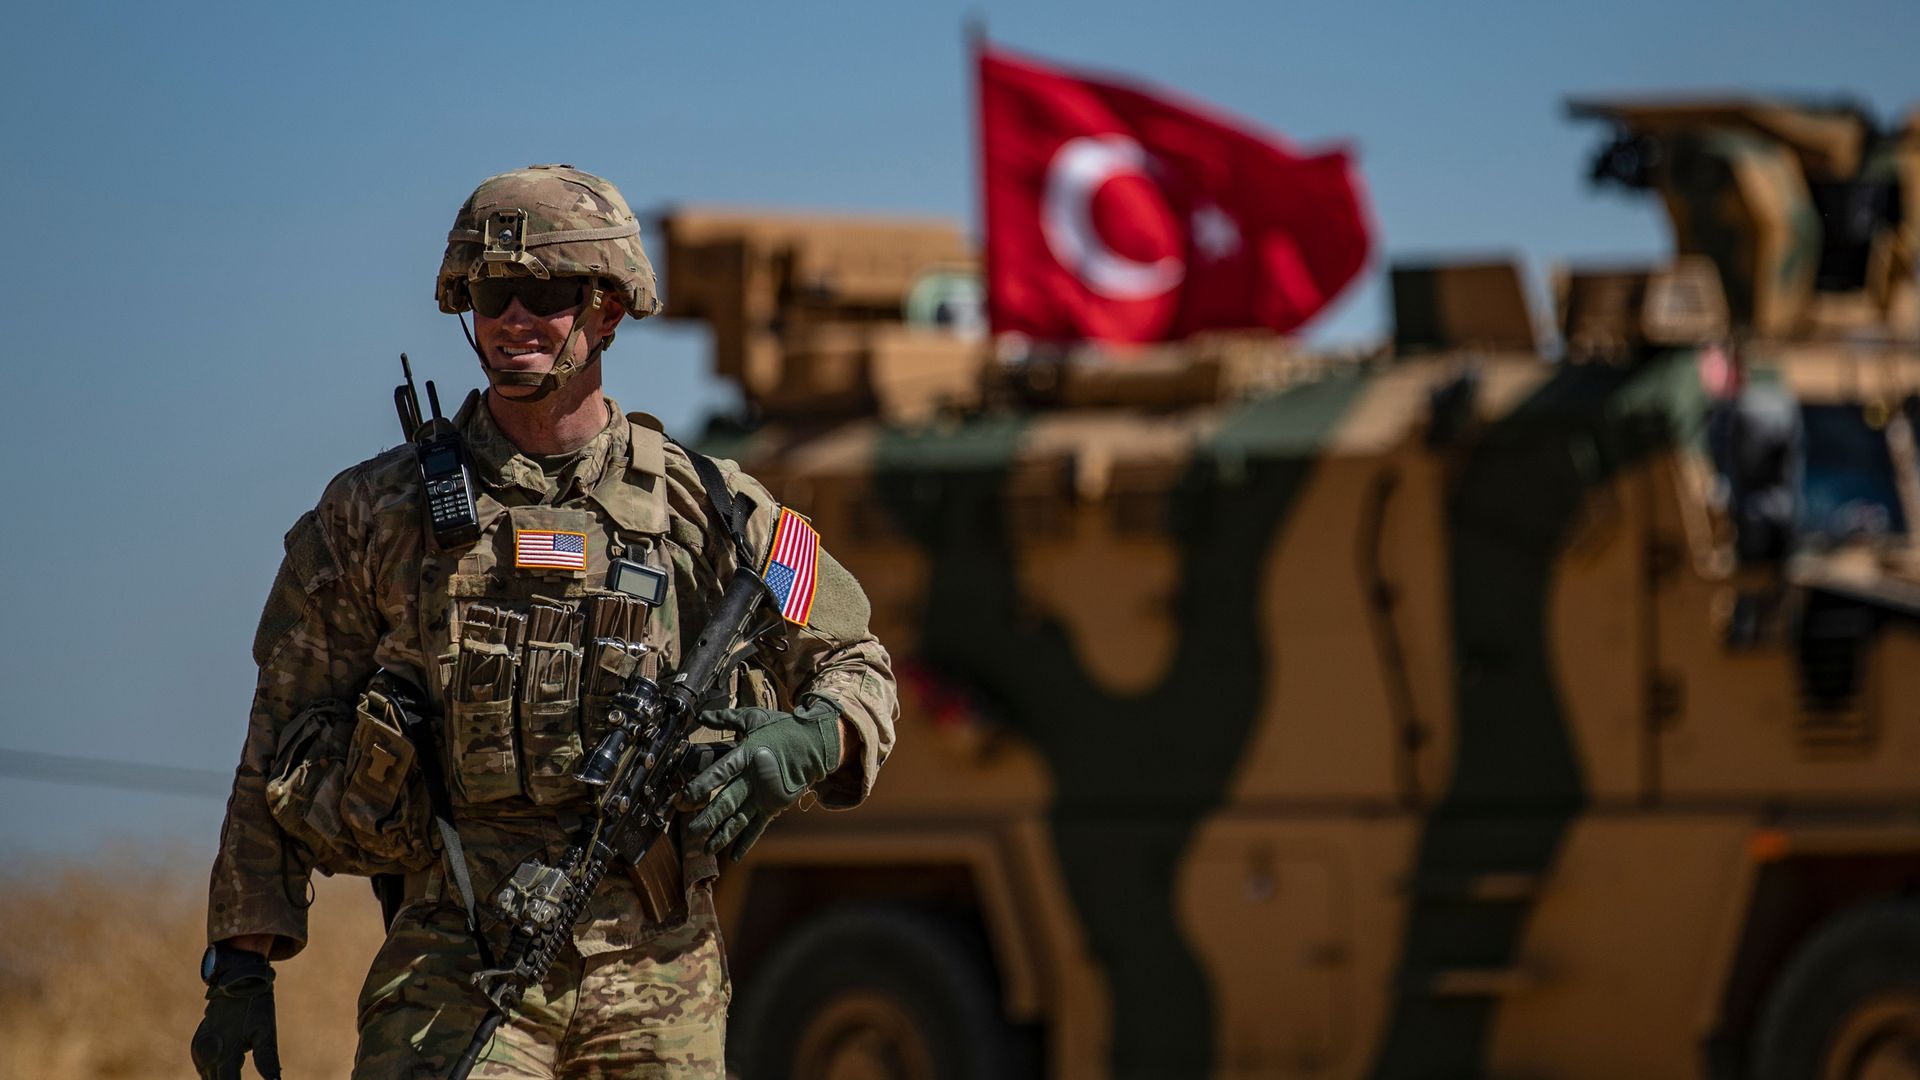  A US soldier stands guard during a joint patrol with Turkish troops in the Syrian village of al-Hashisha